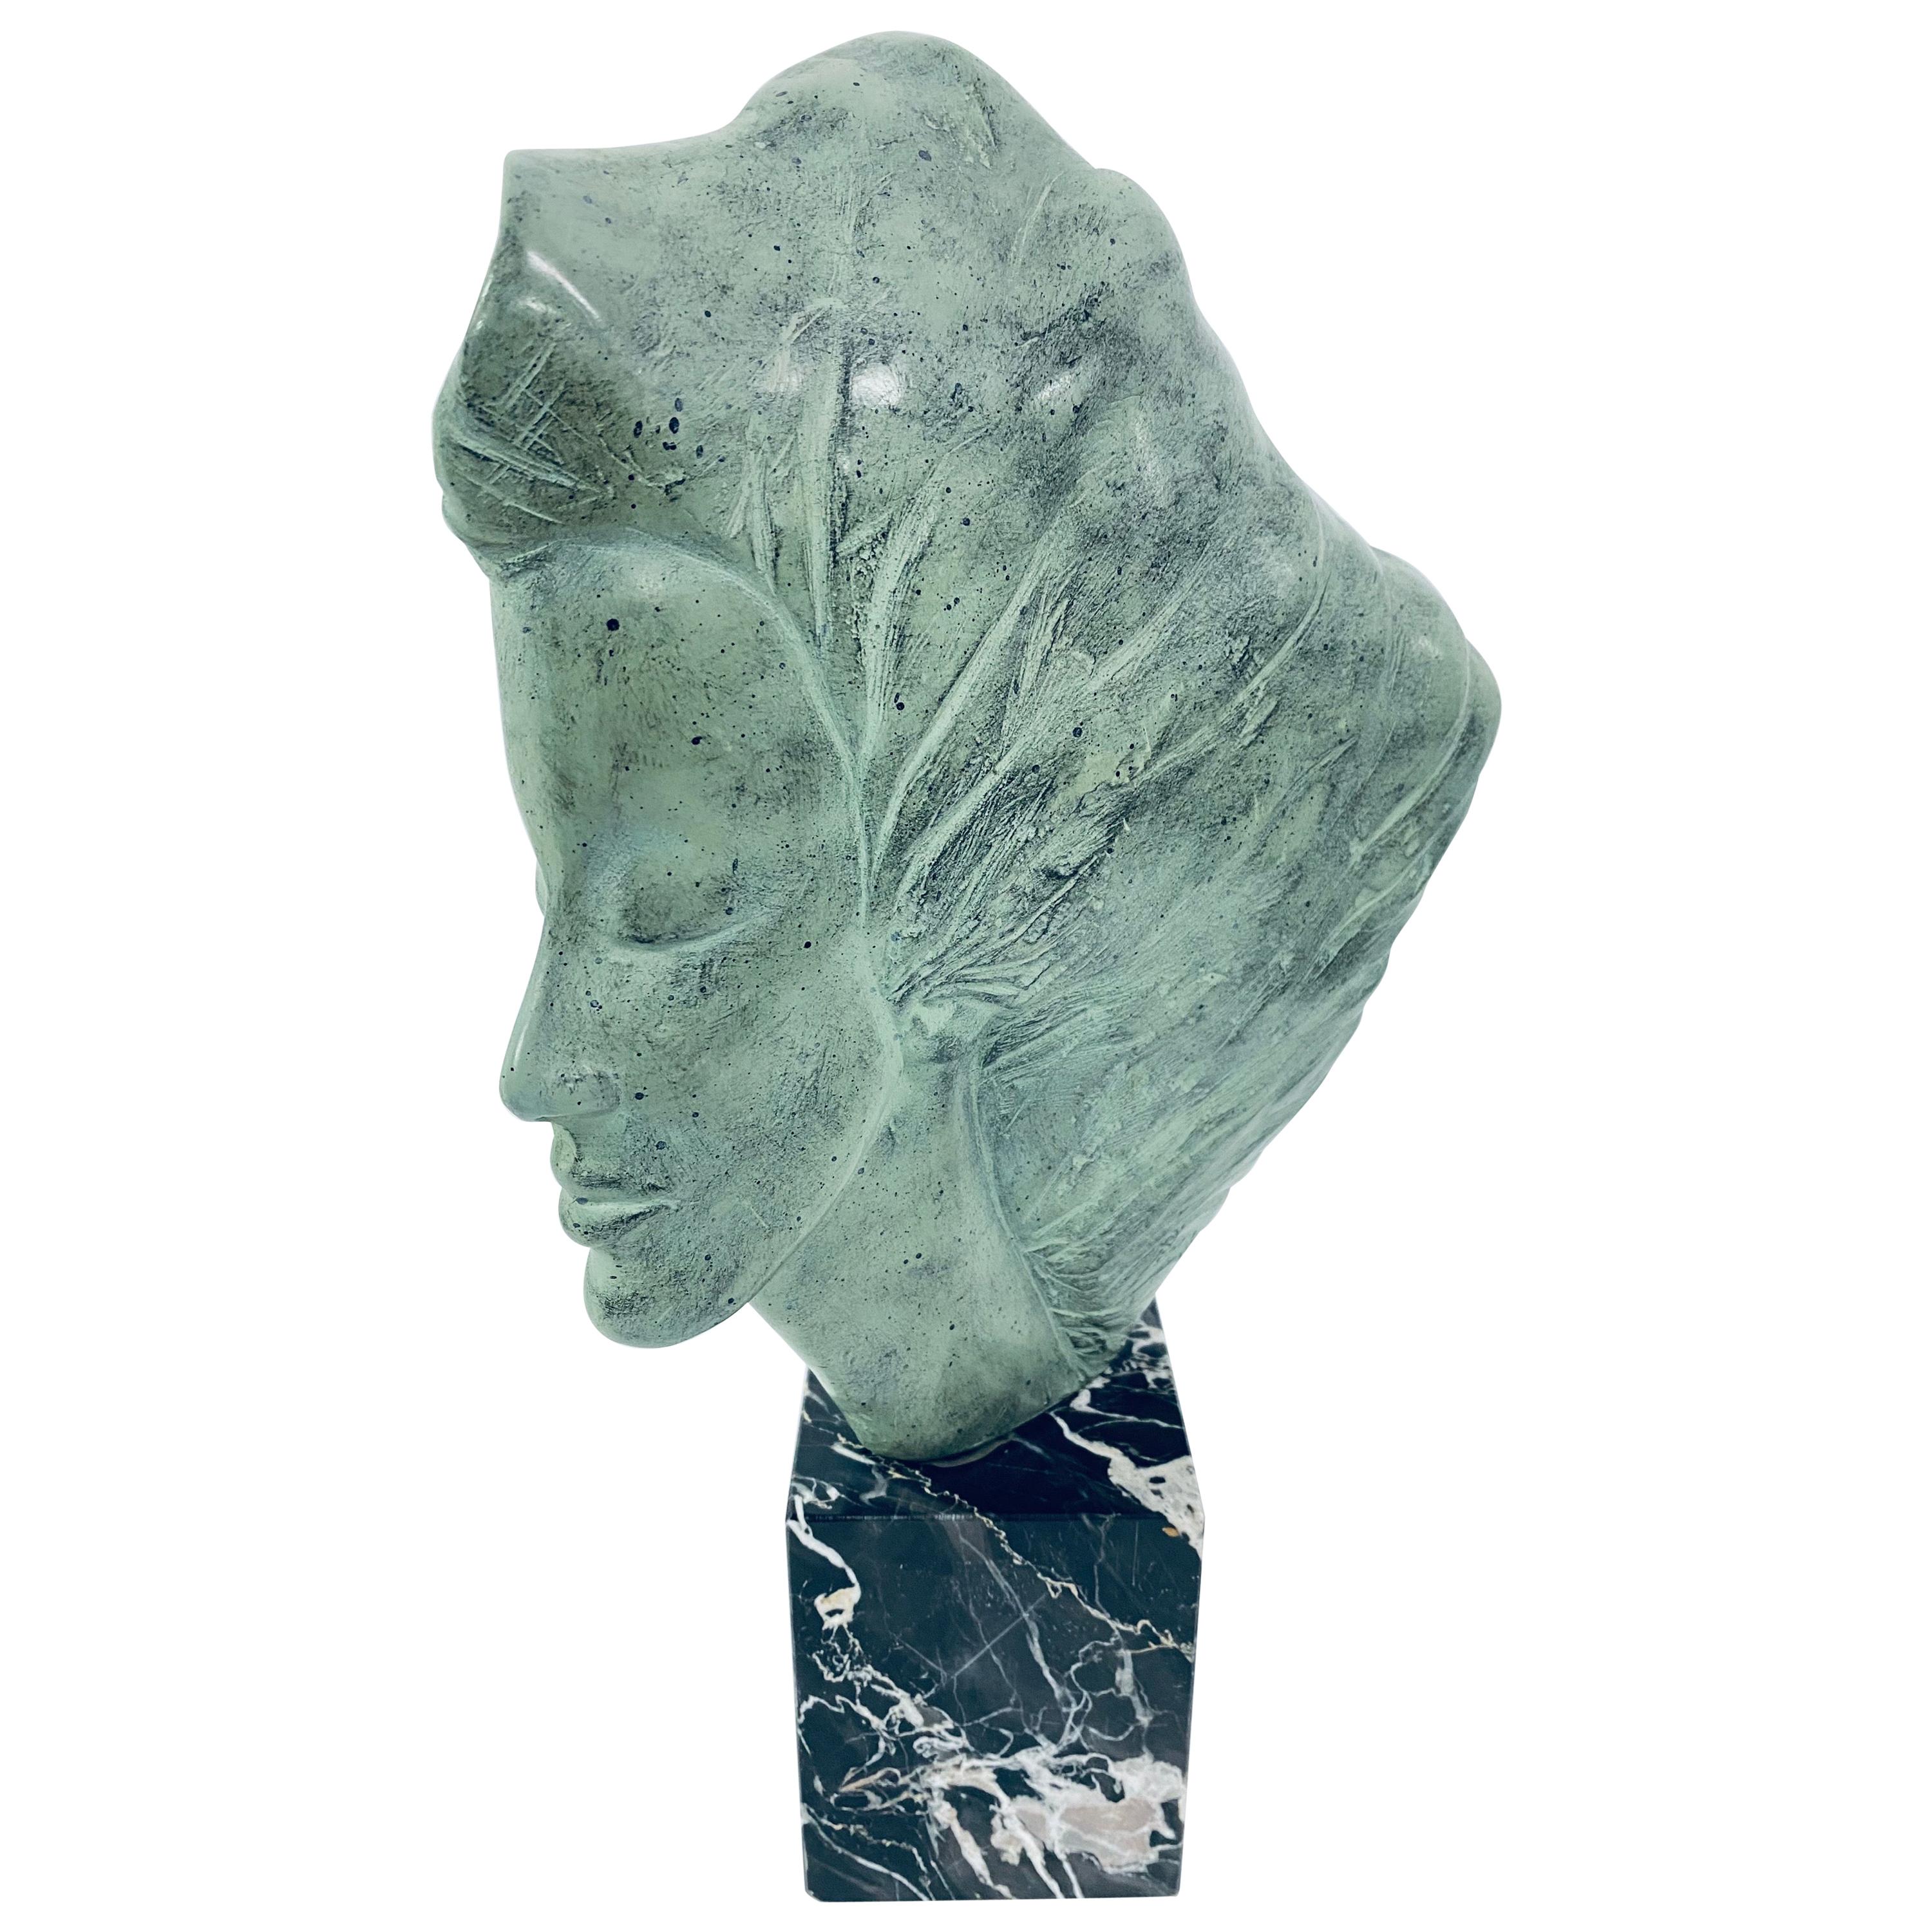 Midcentury Sculpted Resin Sculpture on Marble Base by Peggy March